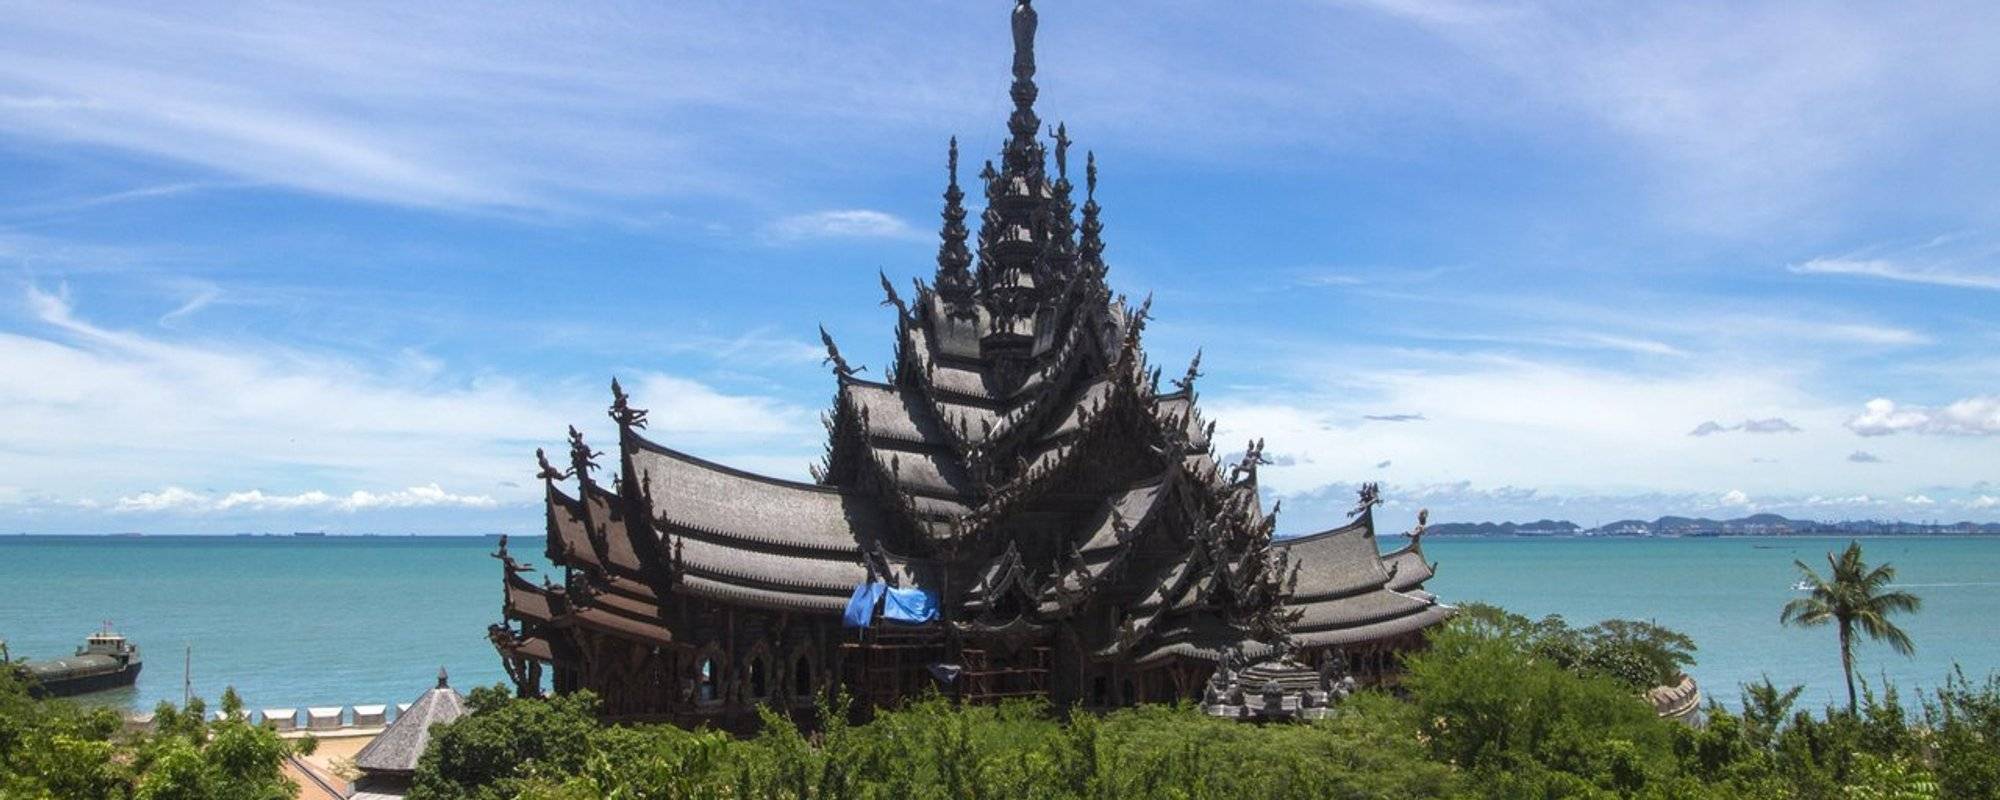 A visit to the Sanctuary of Truth (Pattaya, Thailand)